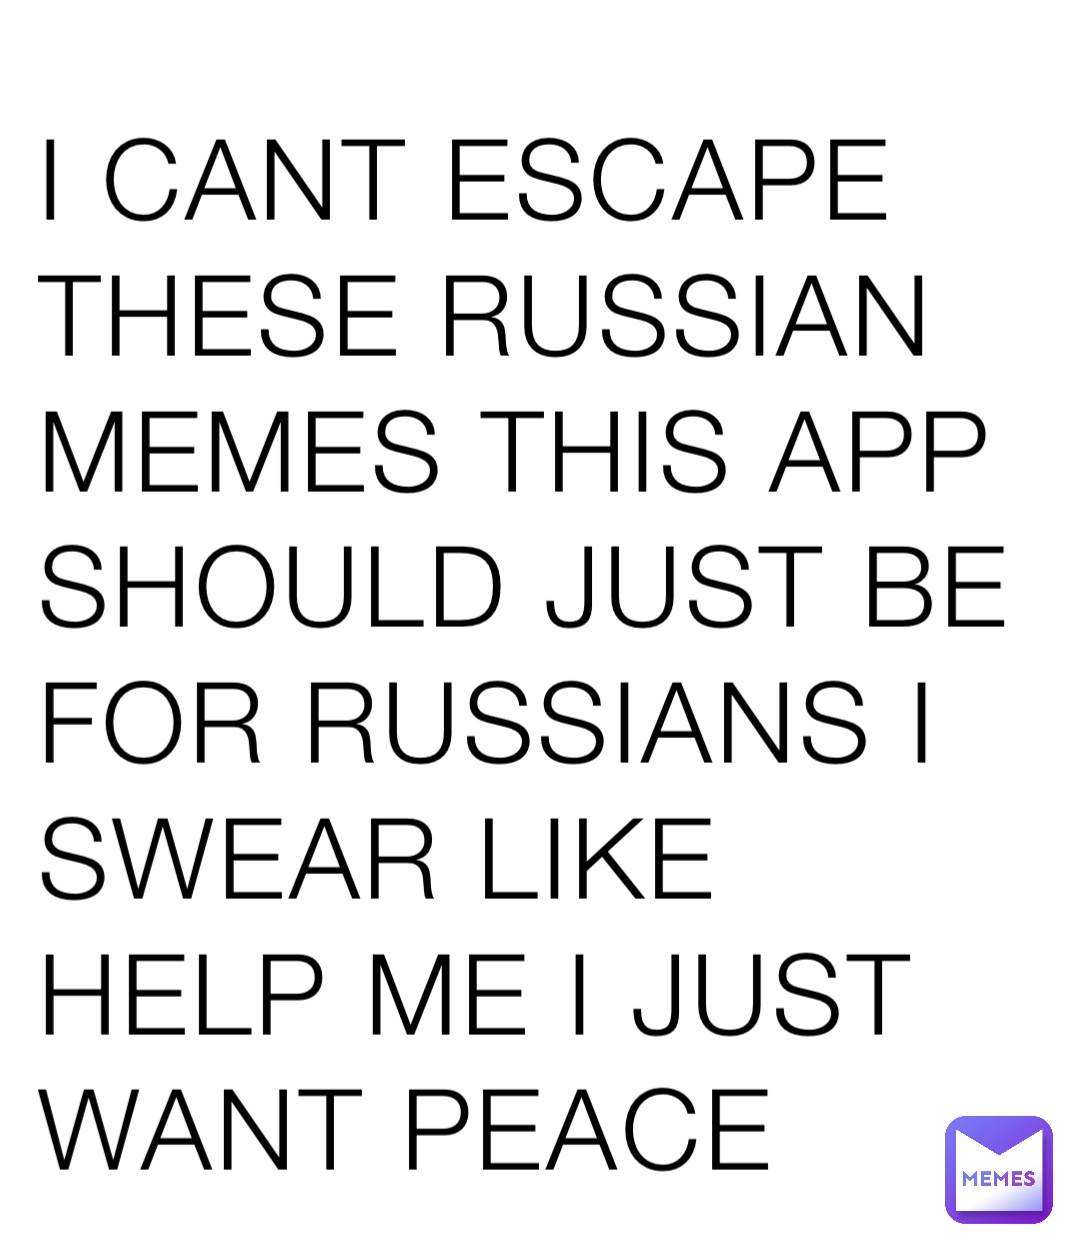 I CANT ESCAPE THESE RUSSIAN MEMES THIS APP SHOULD JUST BE FOR RUSSIANS I SWEAR LIKE HELP ME I JUST WANT PEACE